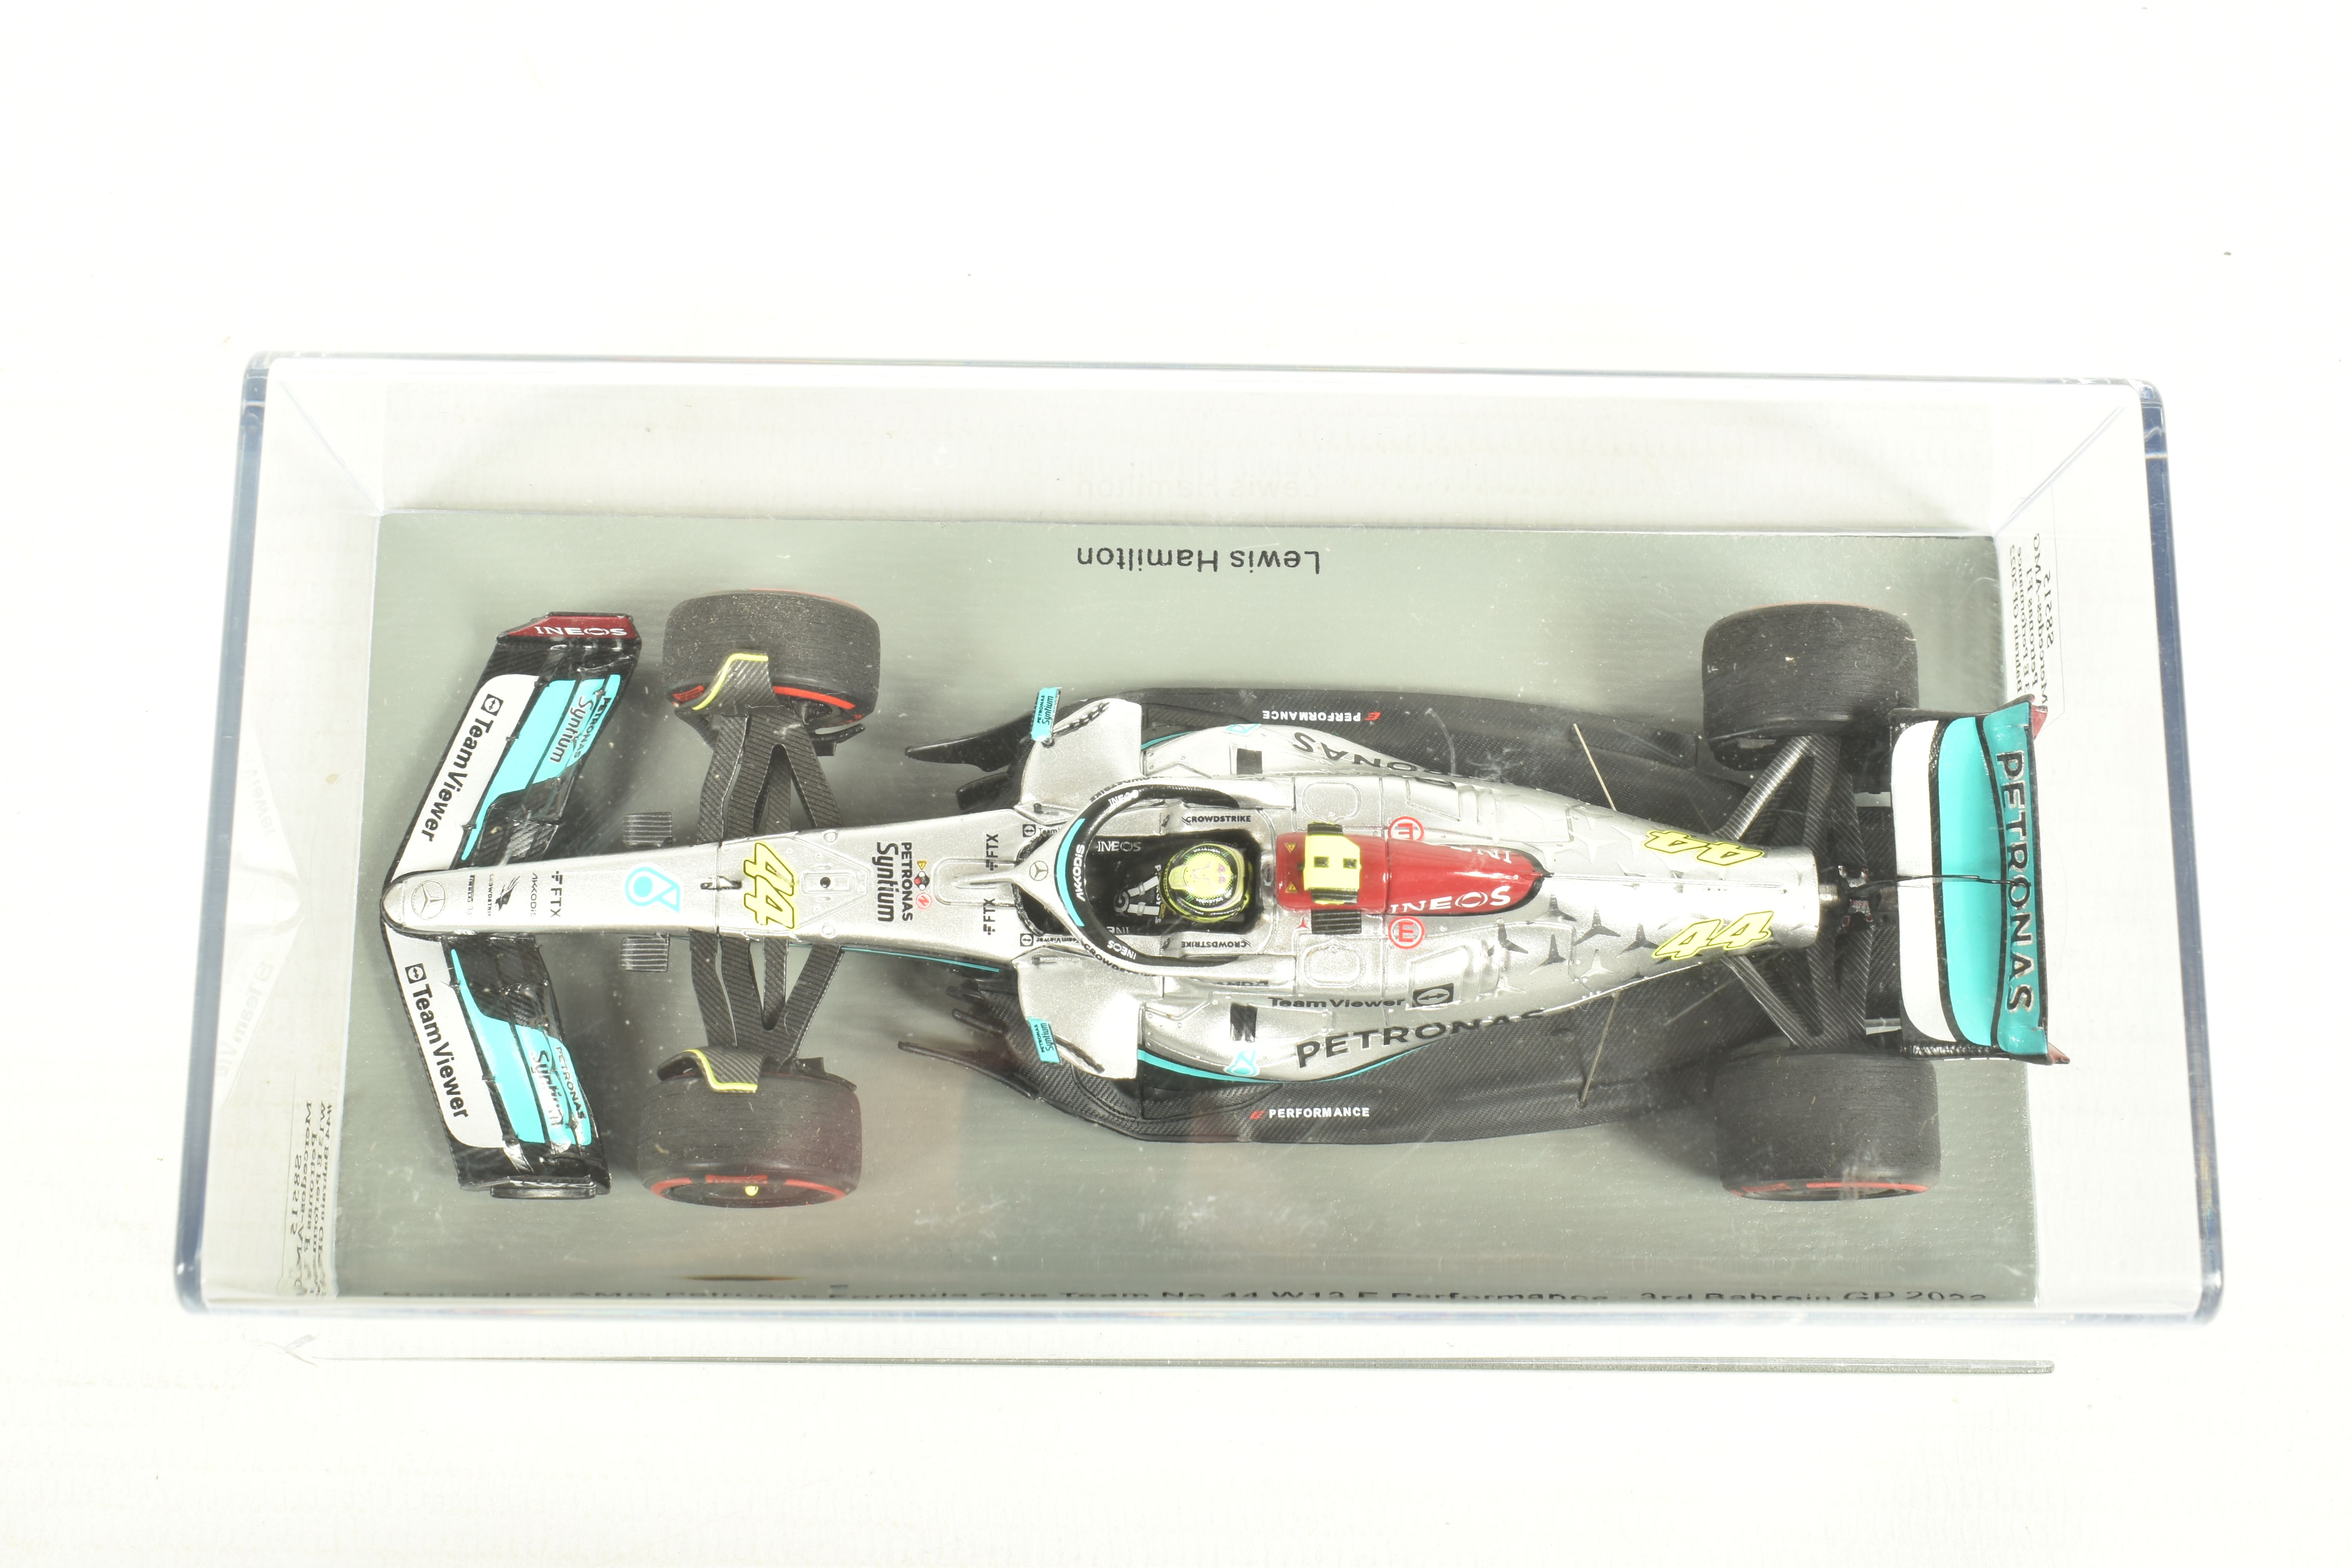 SIX SPARK 1.43 SCALE DIECAST MODELS, to include a Mercedes, AMG Mexican GP 2017, model no. S5054, - Image 7 of 13